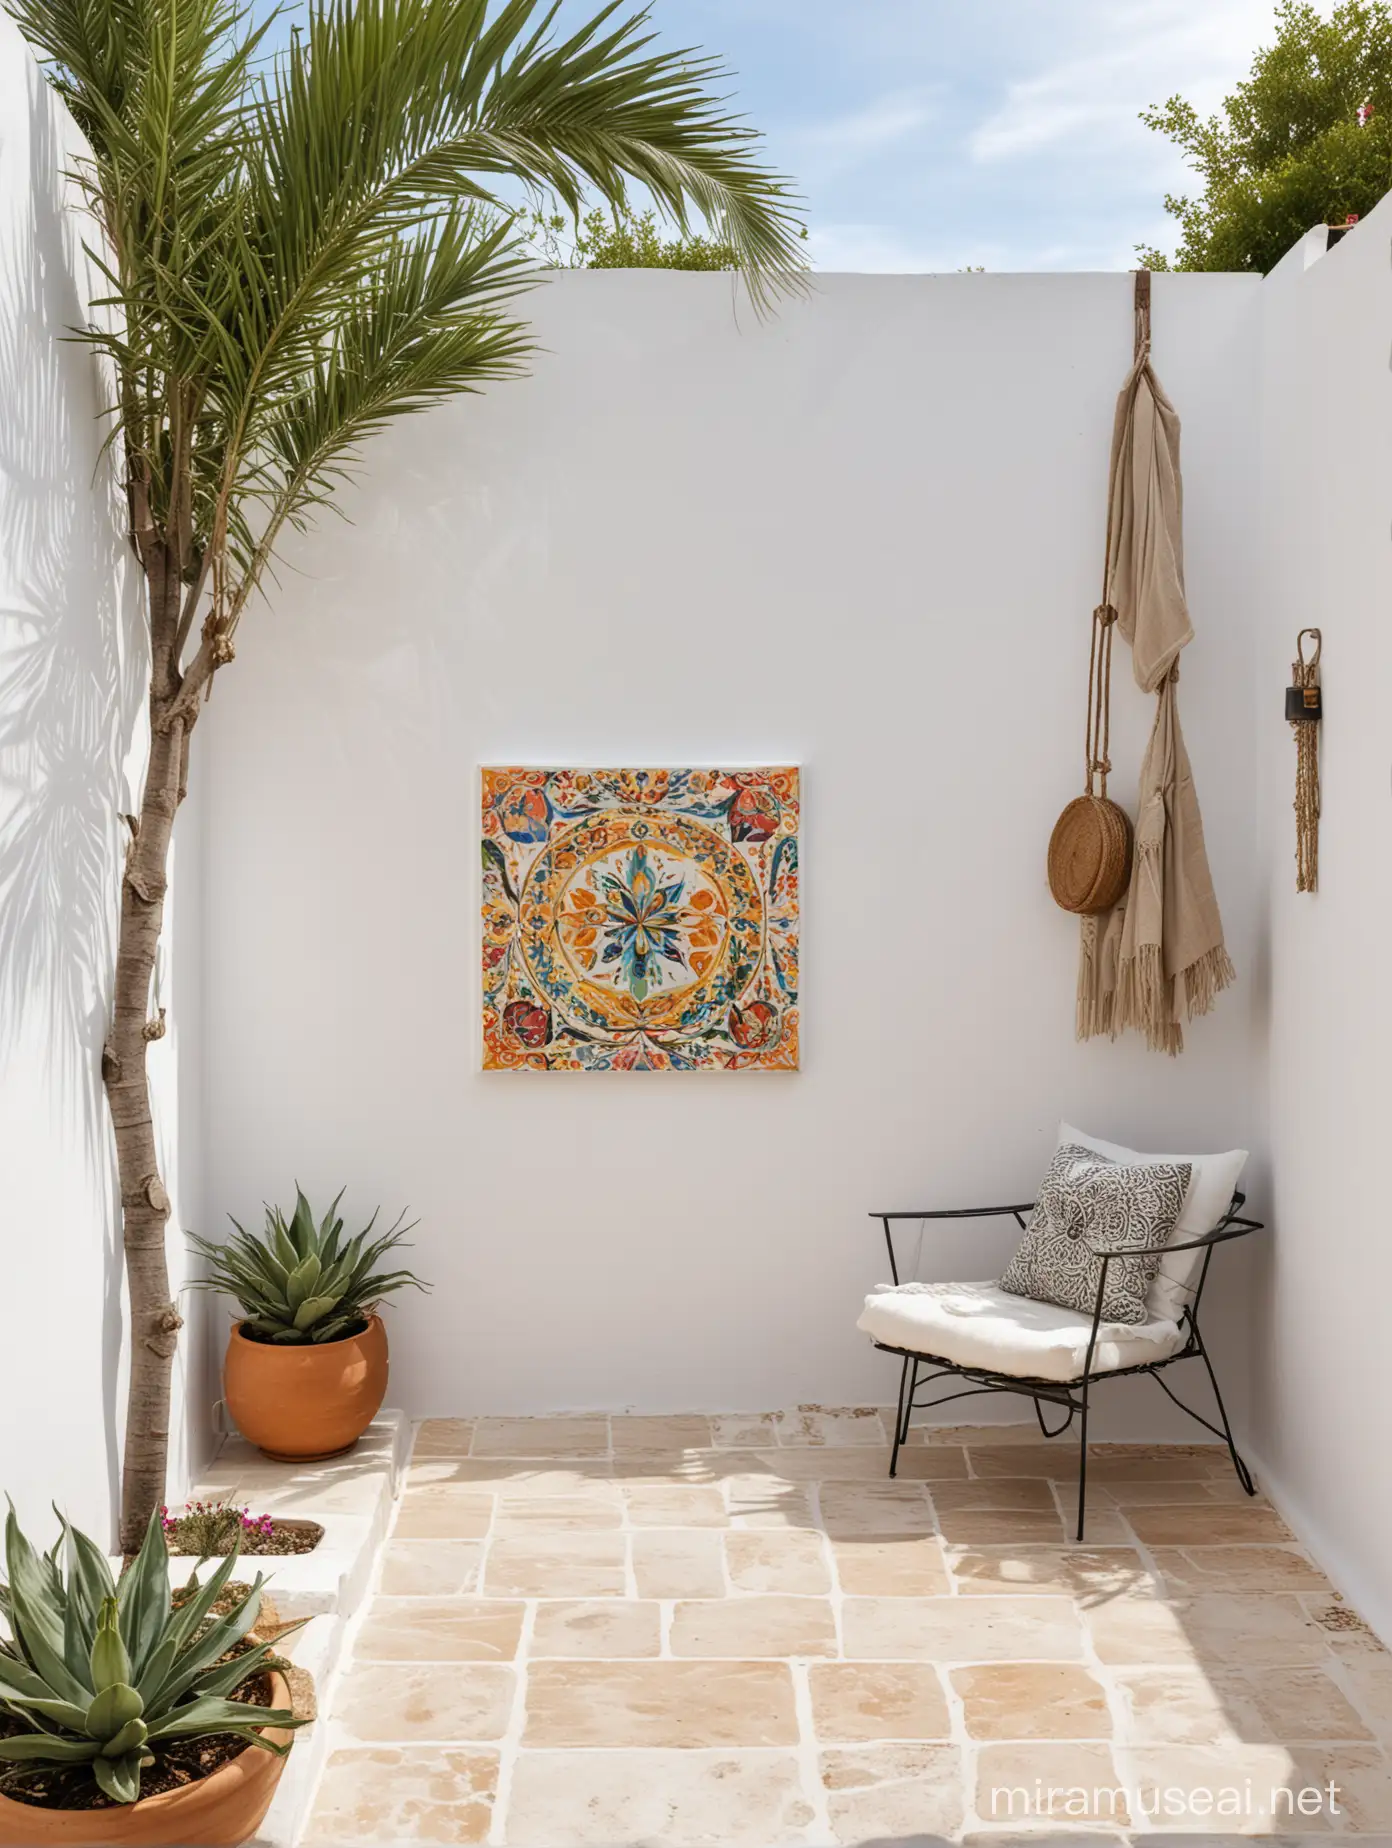 Small Square painting on white wall, Ibiza style patio